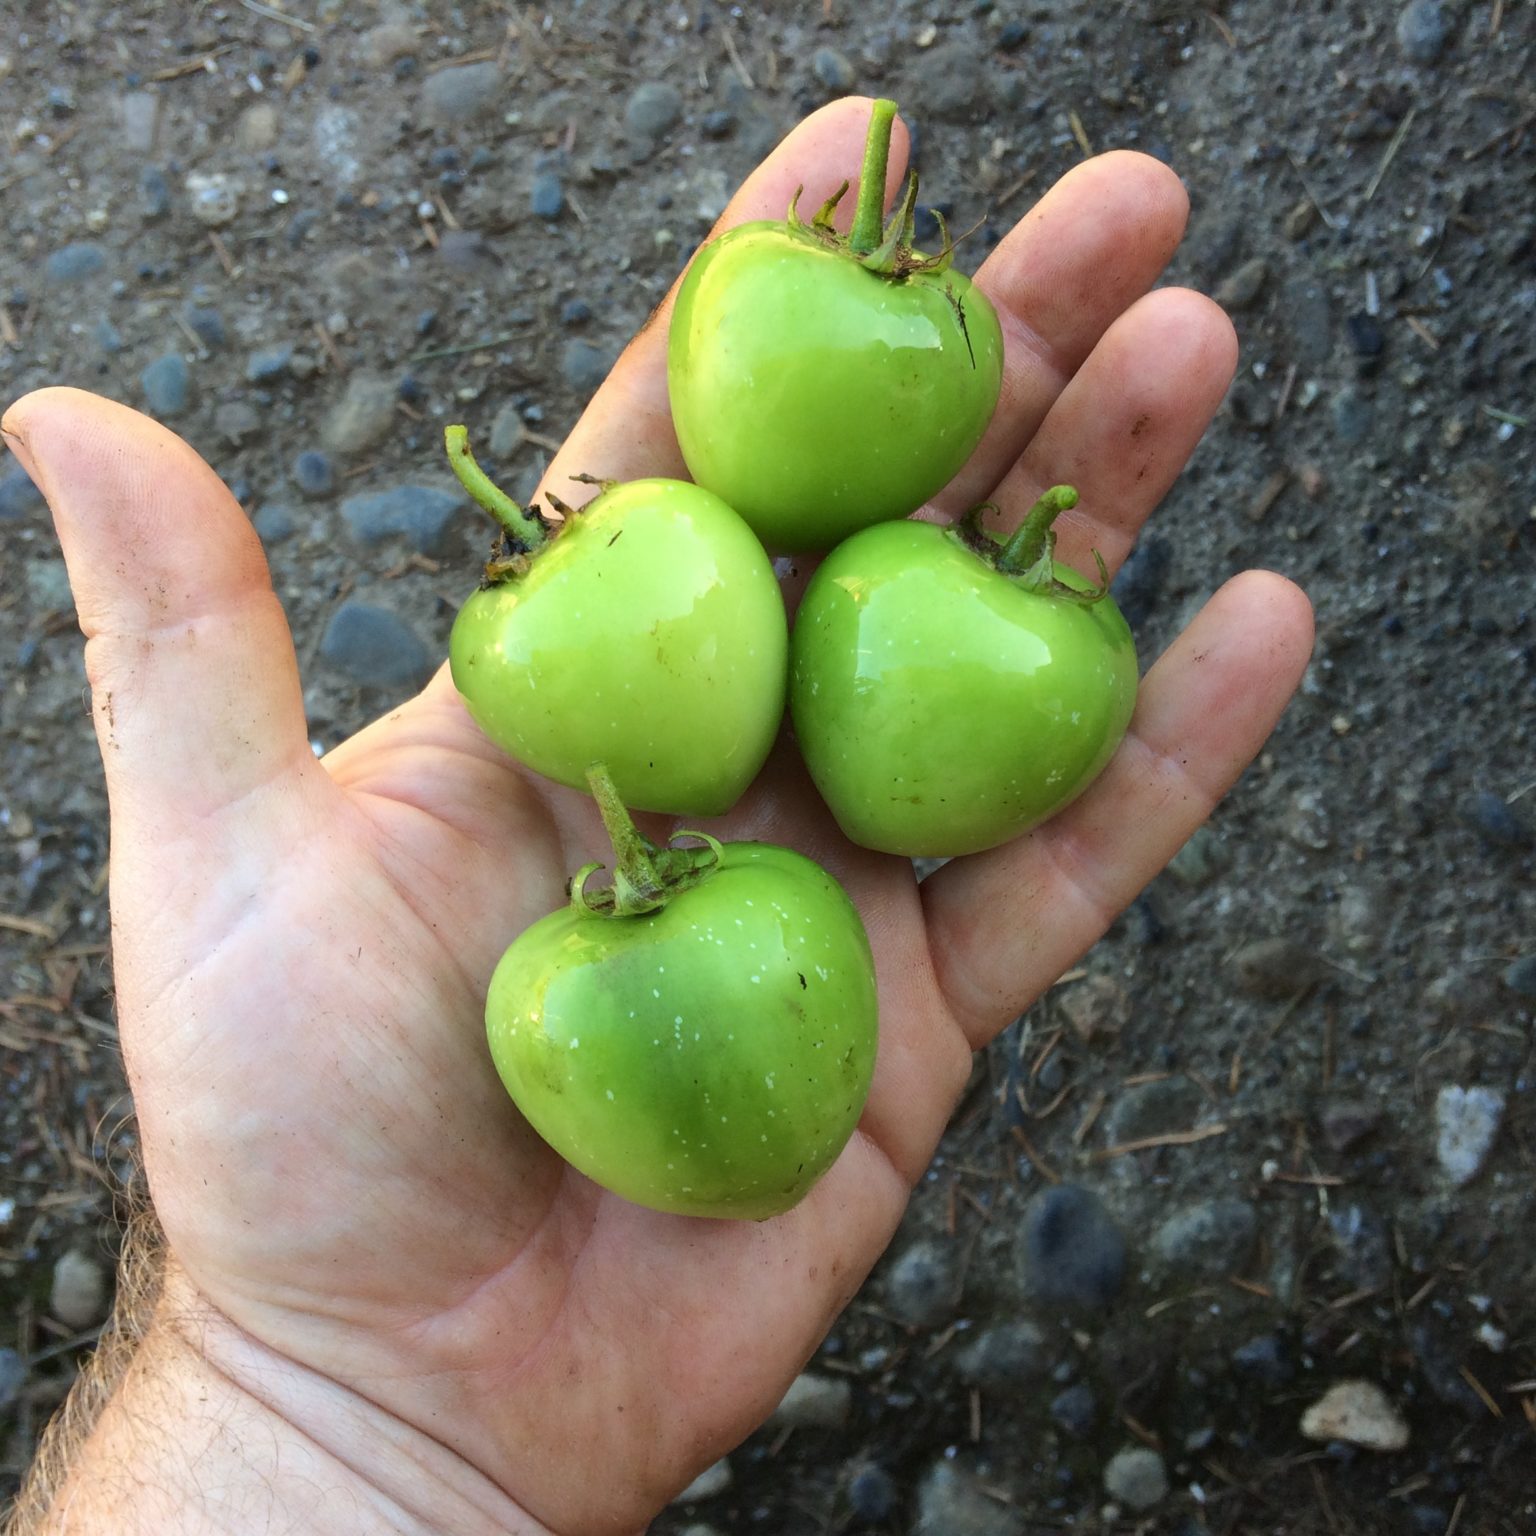 Four large potato berries held in hand. They are green with some white speckling.